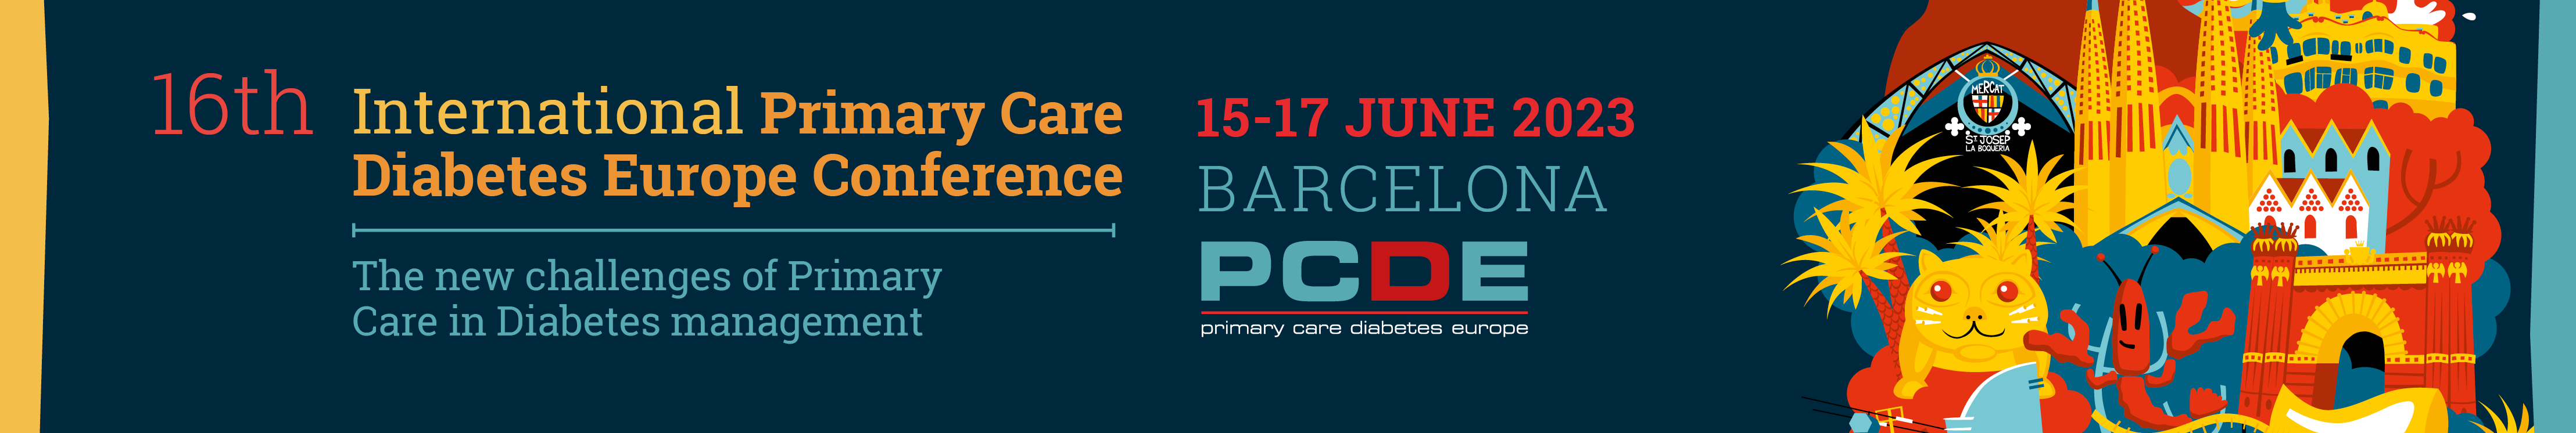 16th International Primary Care Conference